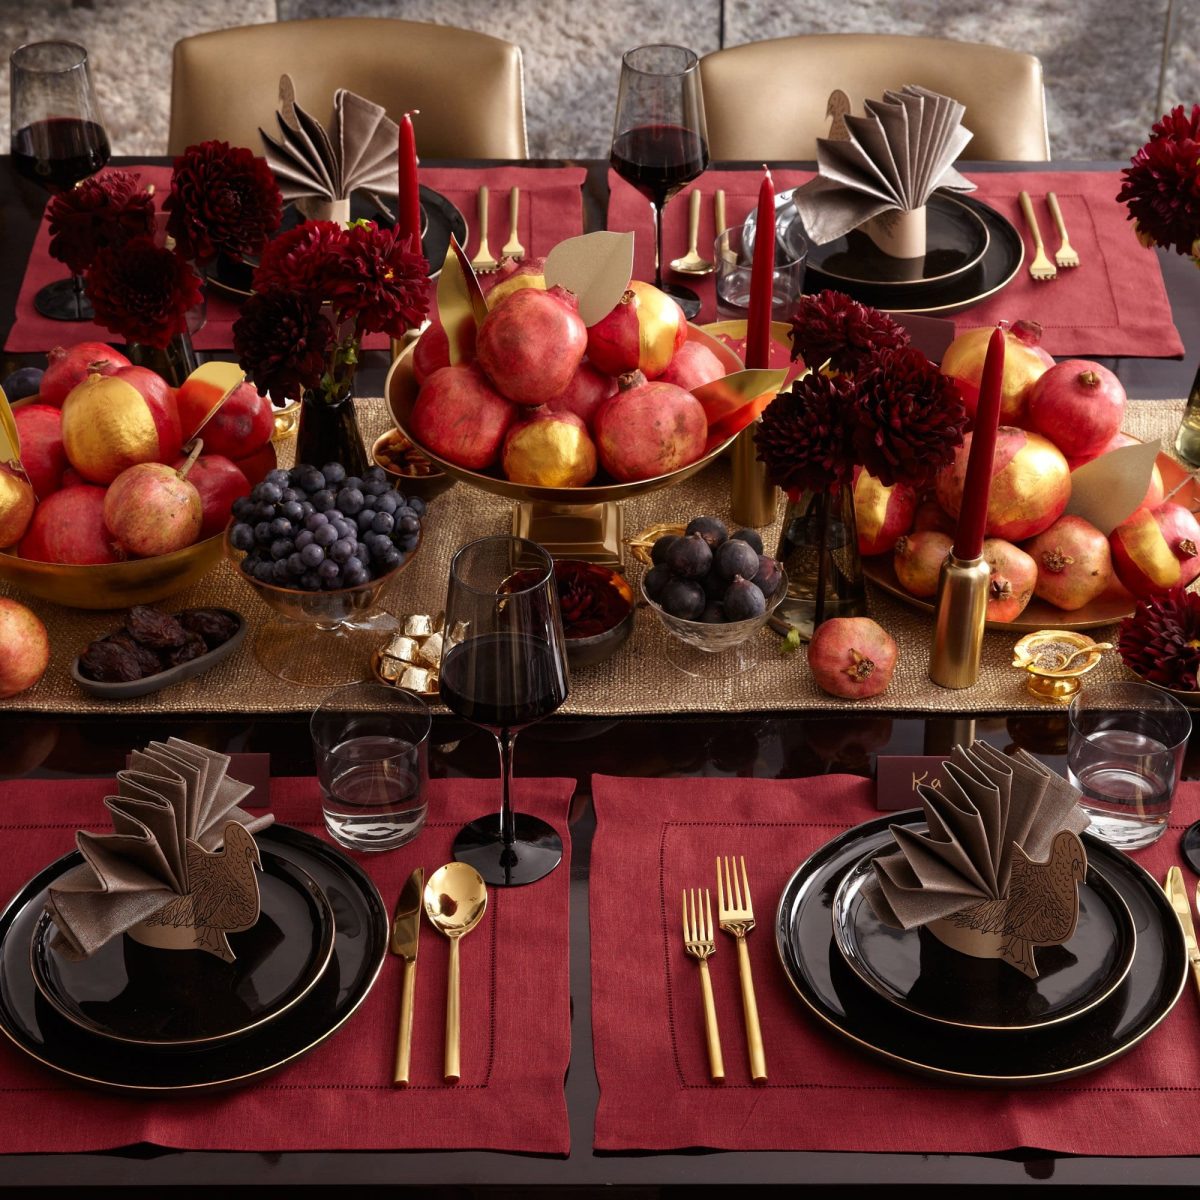 Darcy Miller Designs Pomegranate Thanksgiving Table Thanksgiving, Tablescape, Table Décor, Fall Décor, Autumn Décor, Pomegranate, Table Setting, Centerpiece Inspiration, Gold Paint